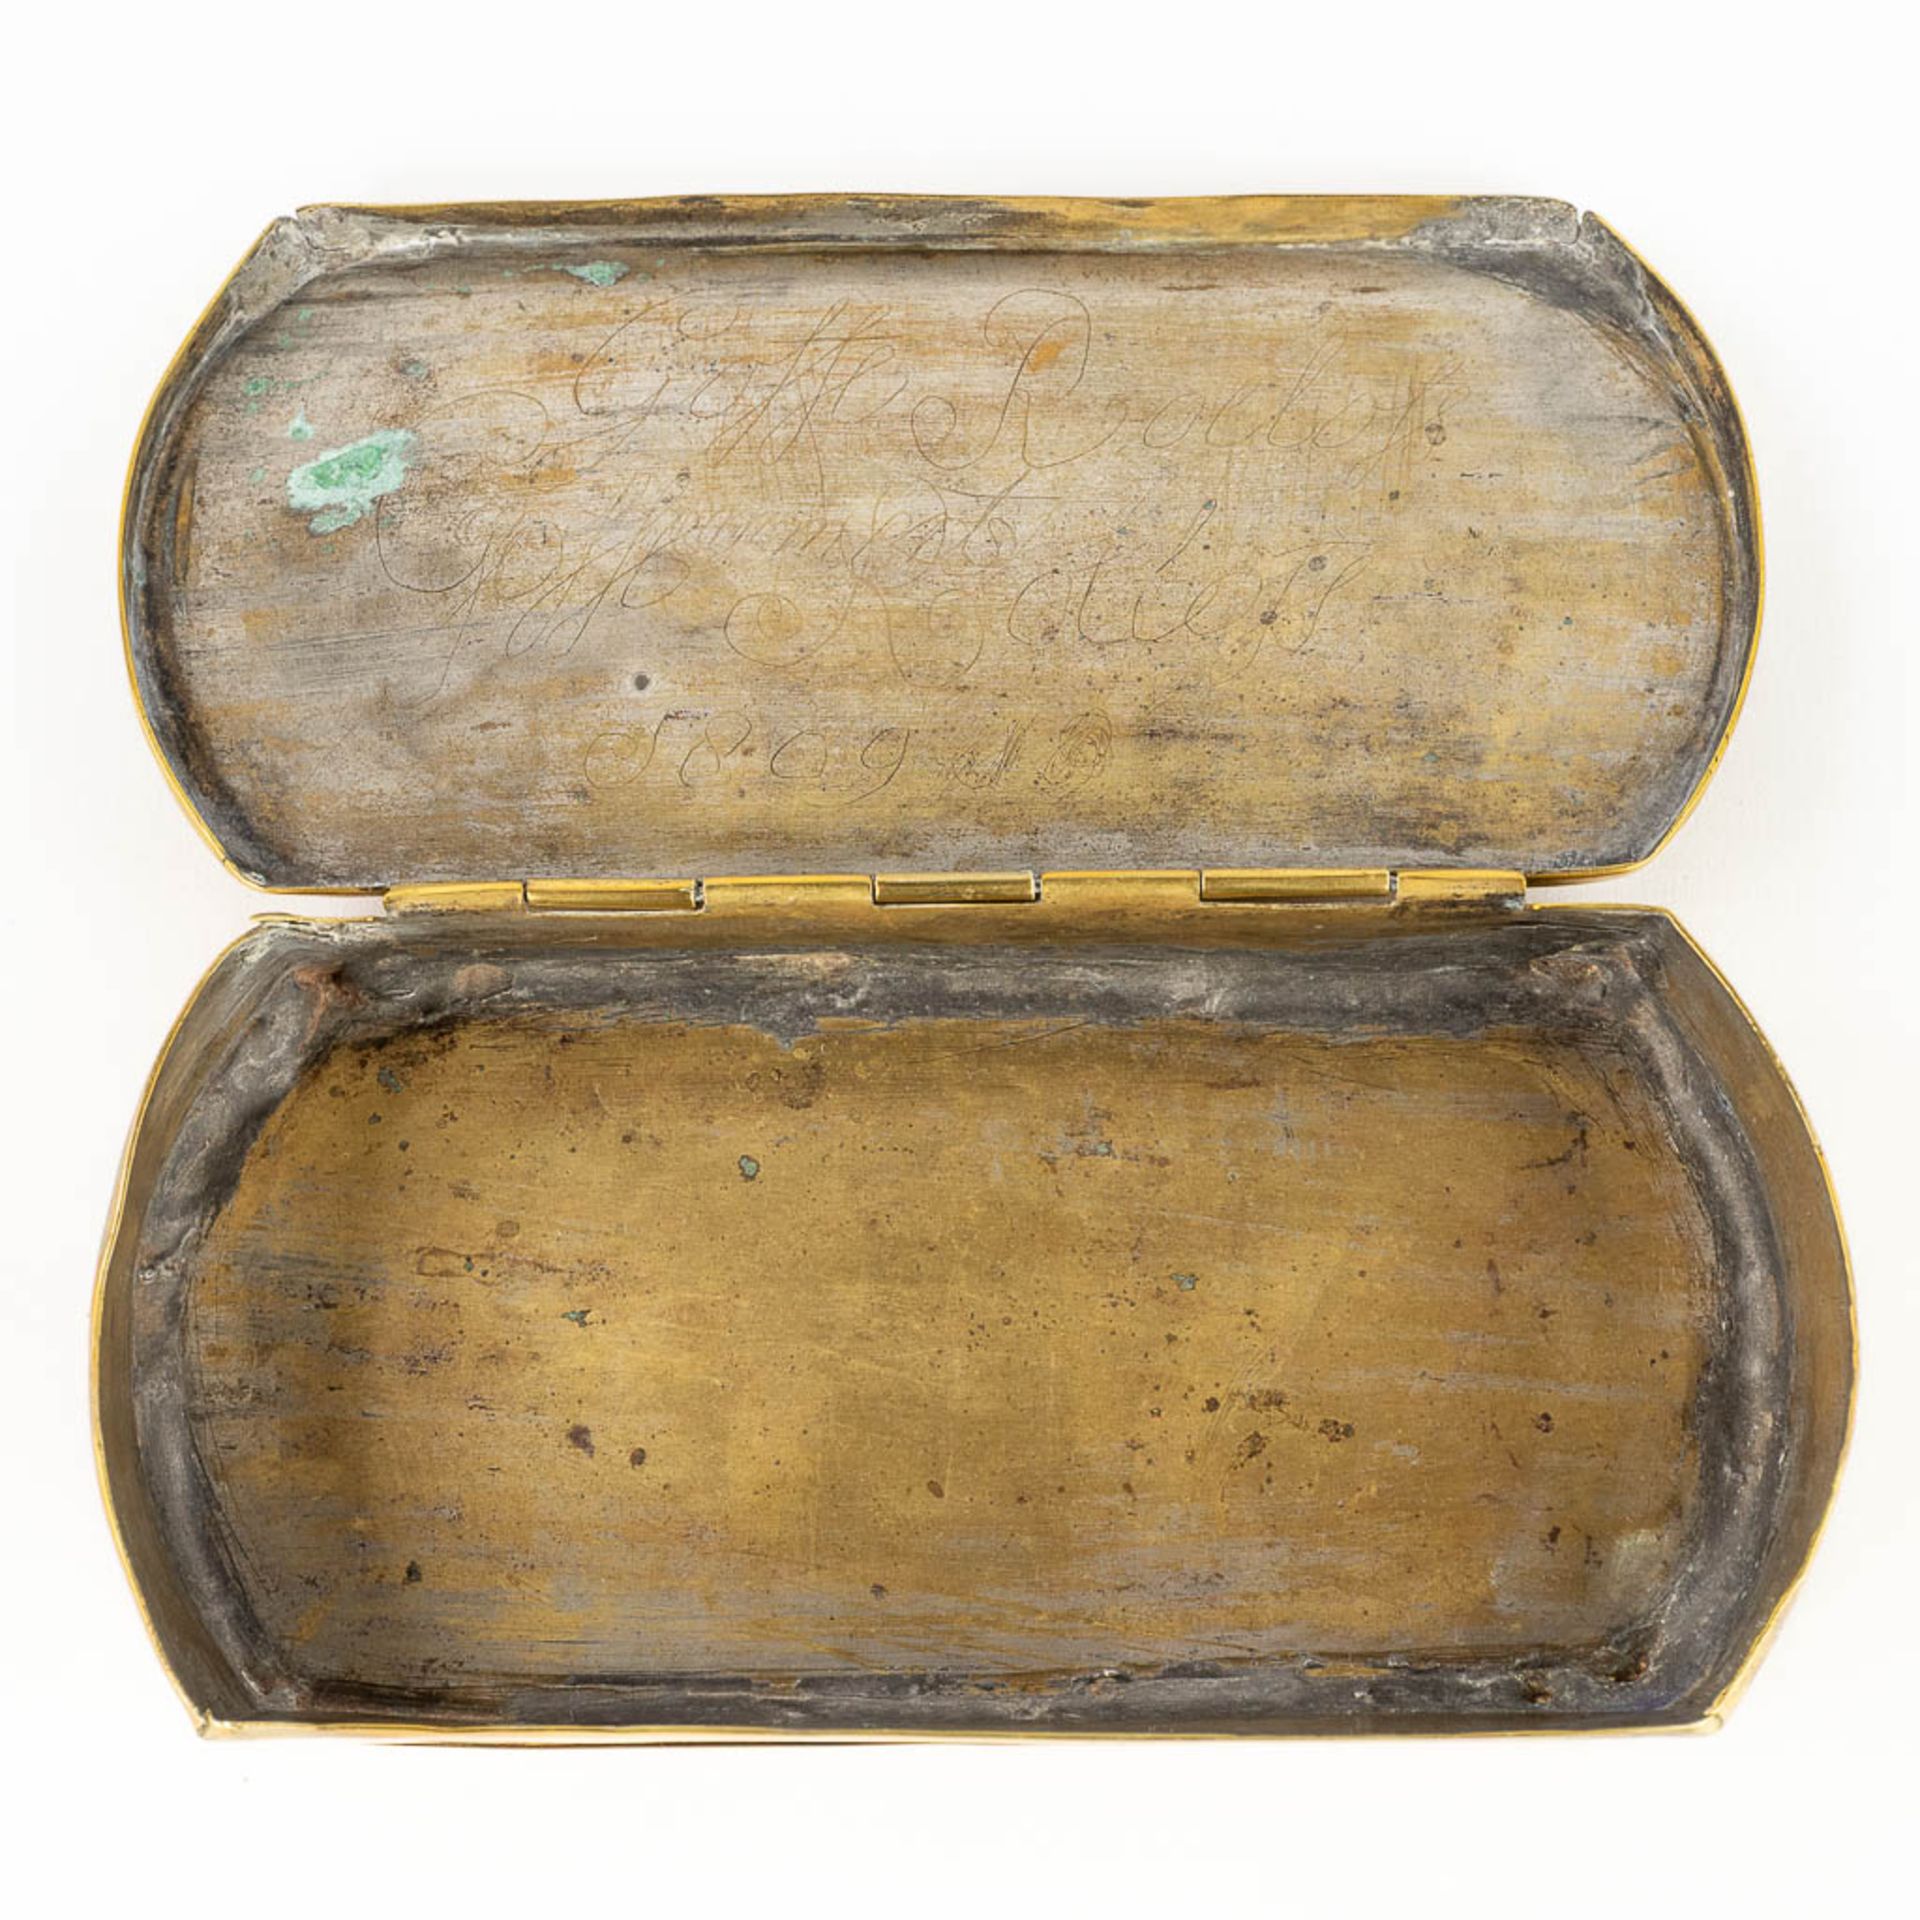 A collection of 3 antique oval tobacco boxes, made of copper. 18th/19th C. (L: 7 x W: 12 x H: 3,5 cm - Image 11 of 13